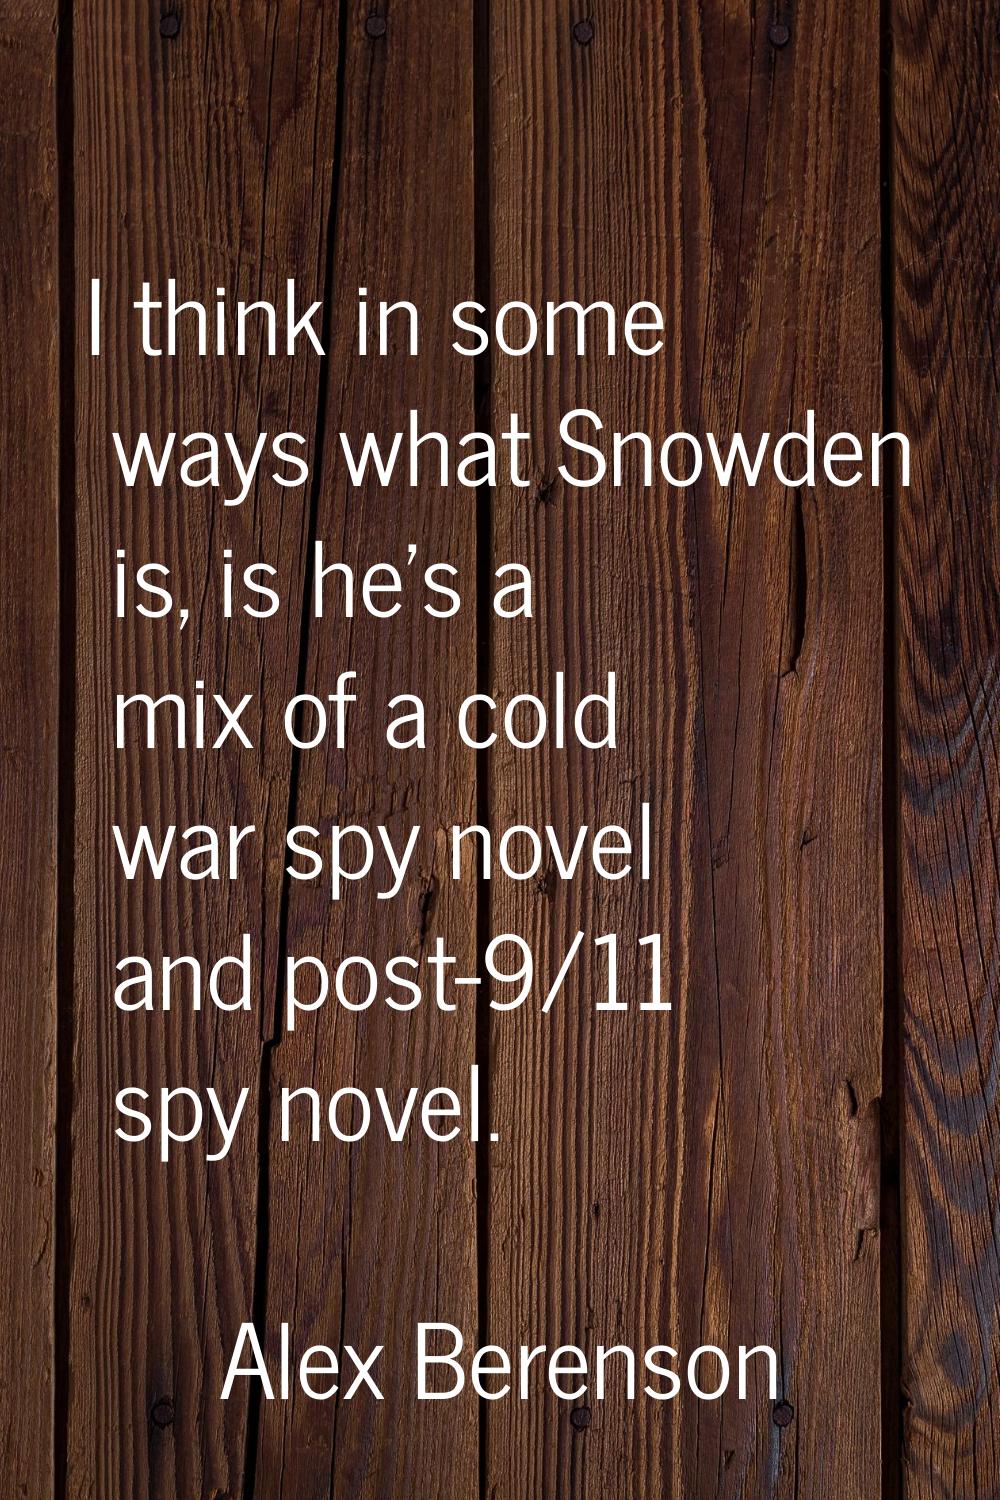 I think in some ways what Snowden is, is he's a mix of a cold war spy novel and post-9/11 spy novel